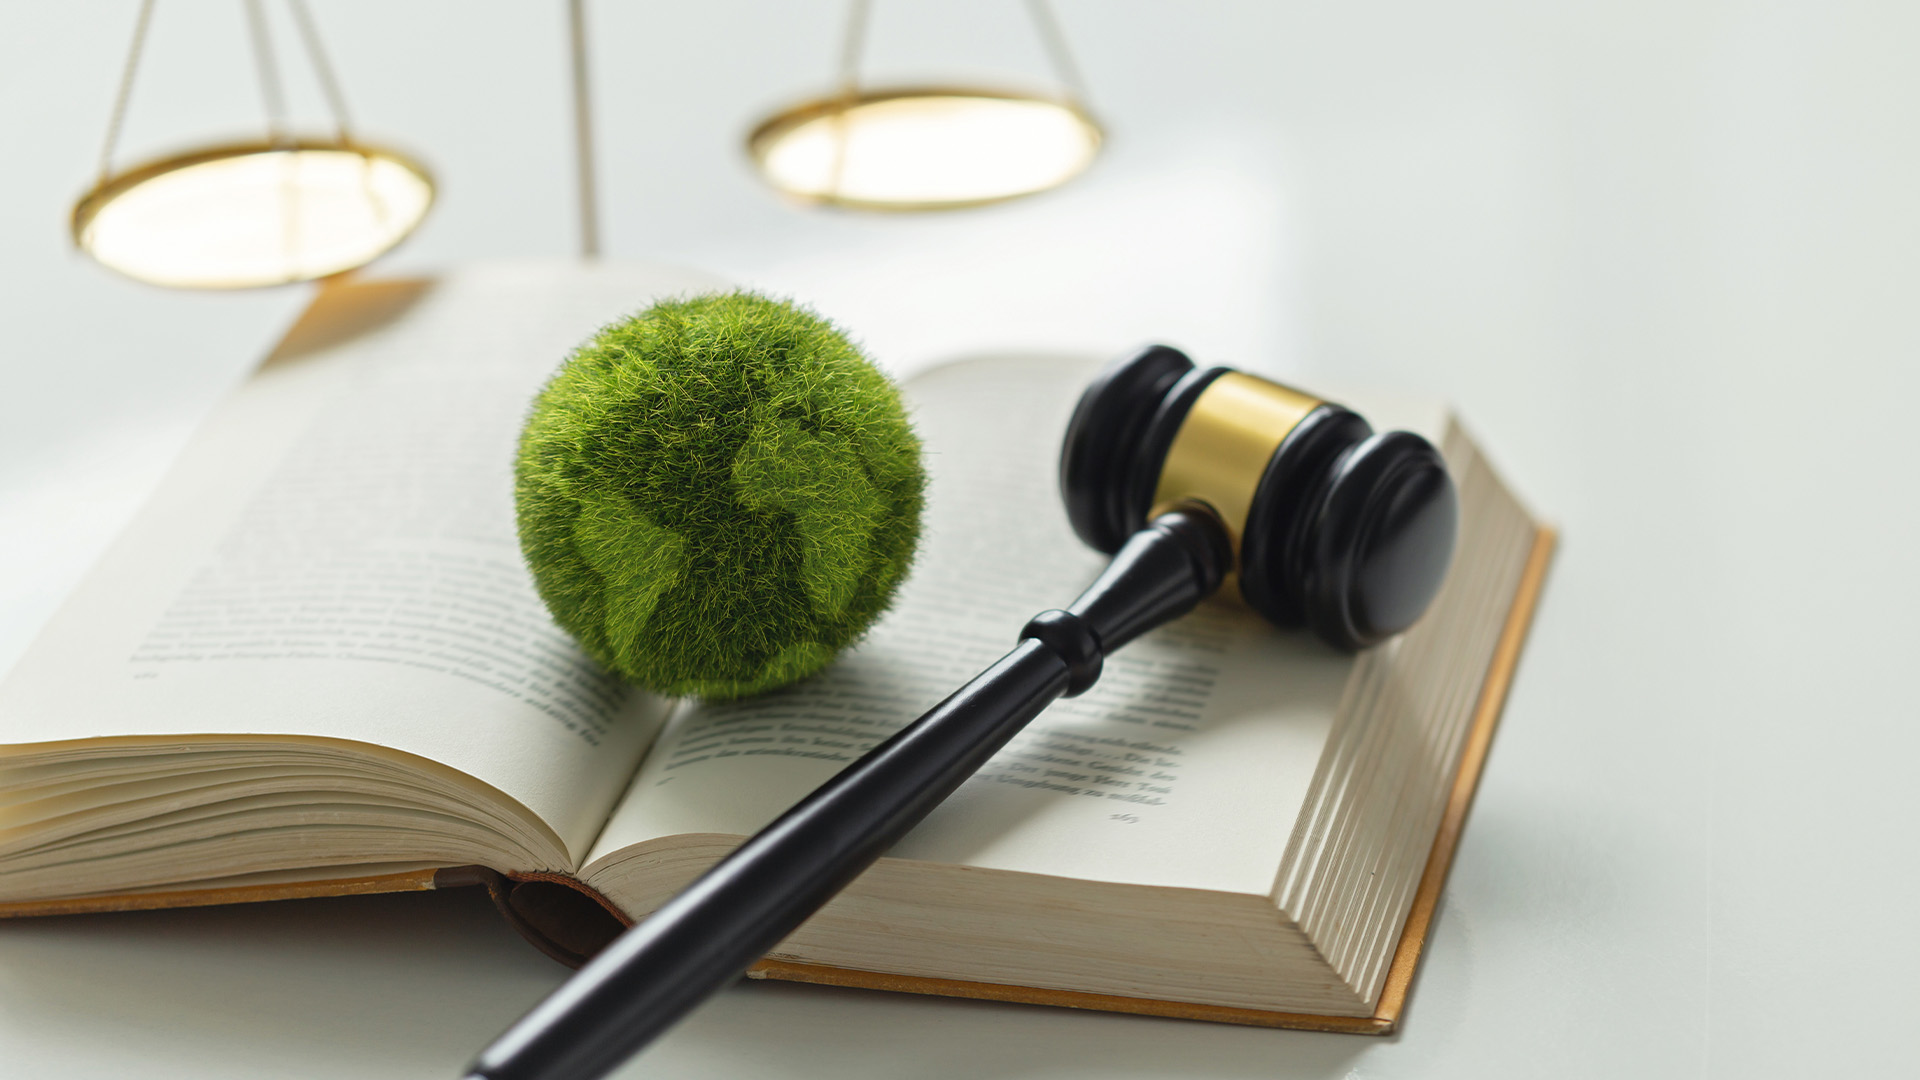 What Does Disposed Mean In Court? - The Hive Law